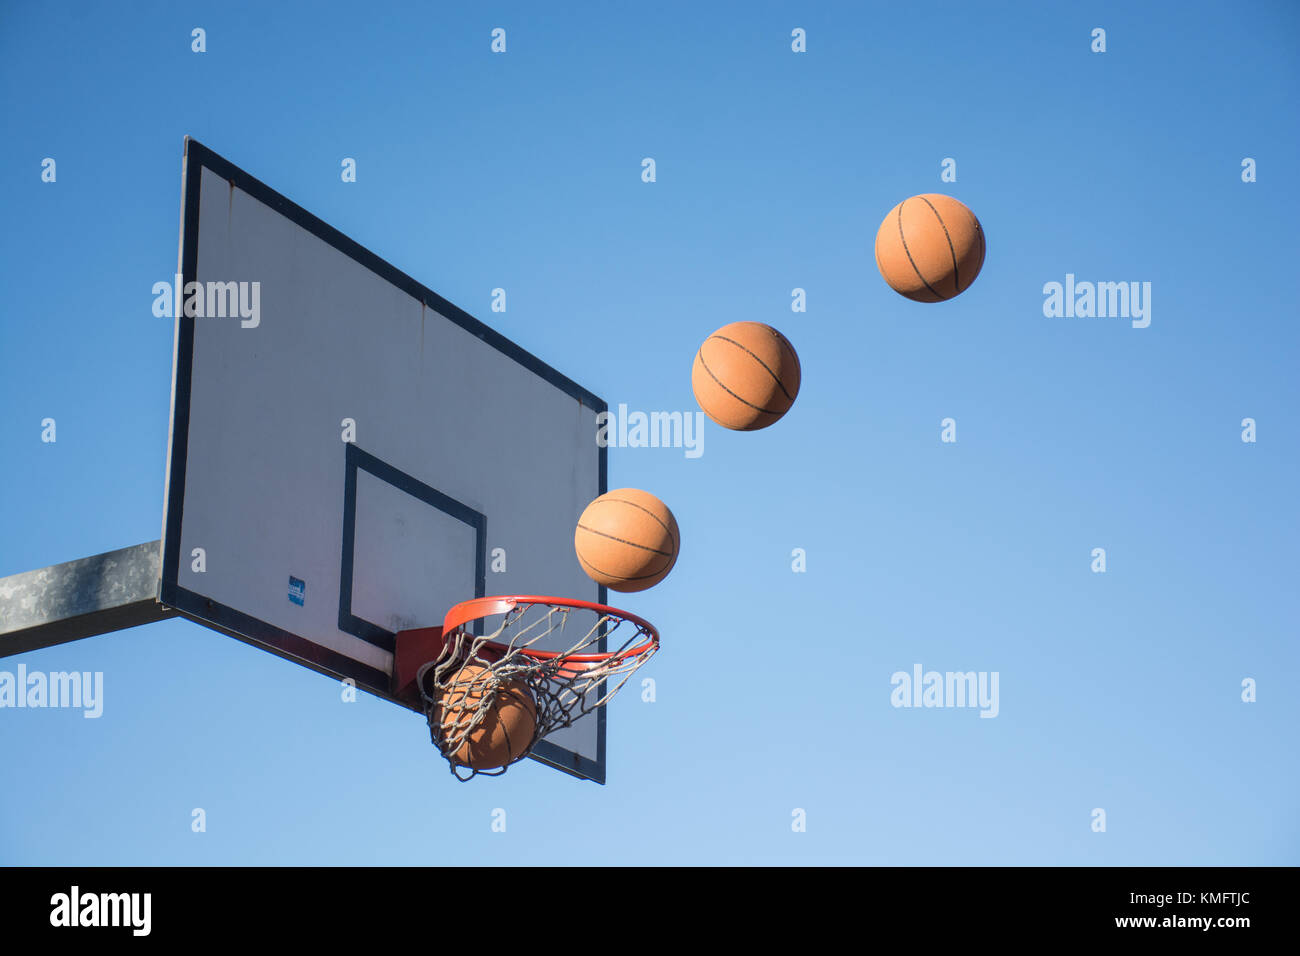 basketball backboard in a playground court Stock Photo